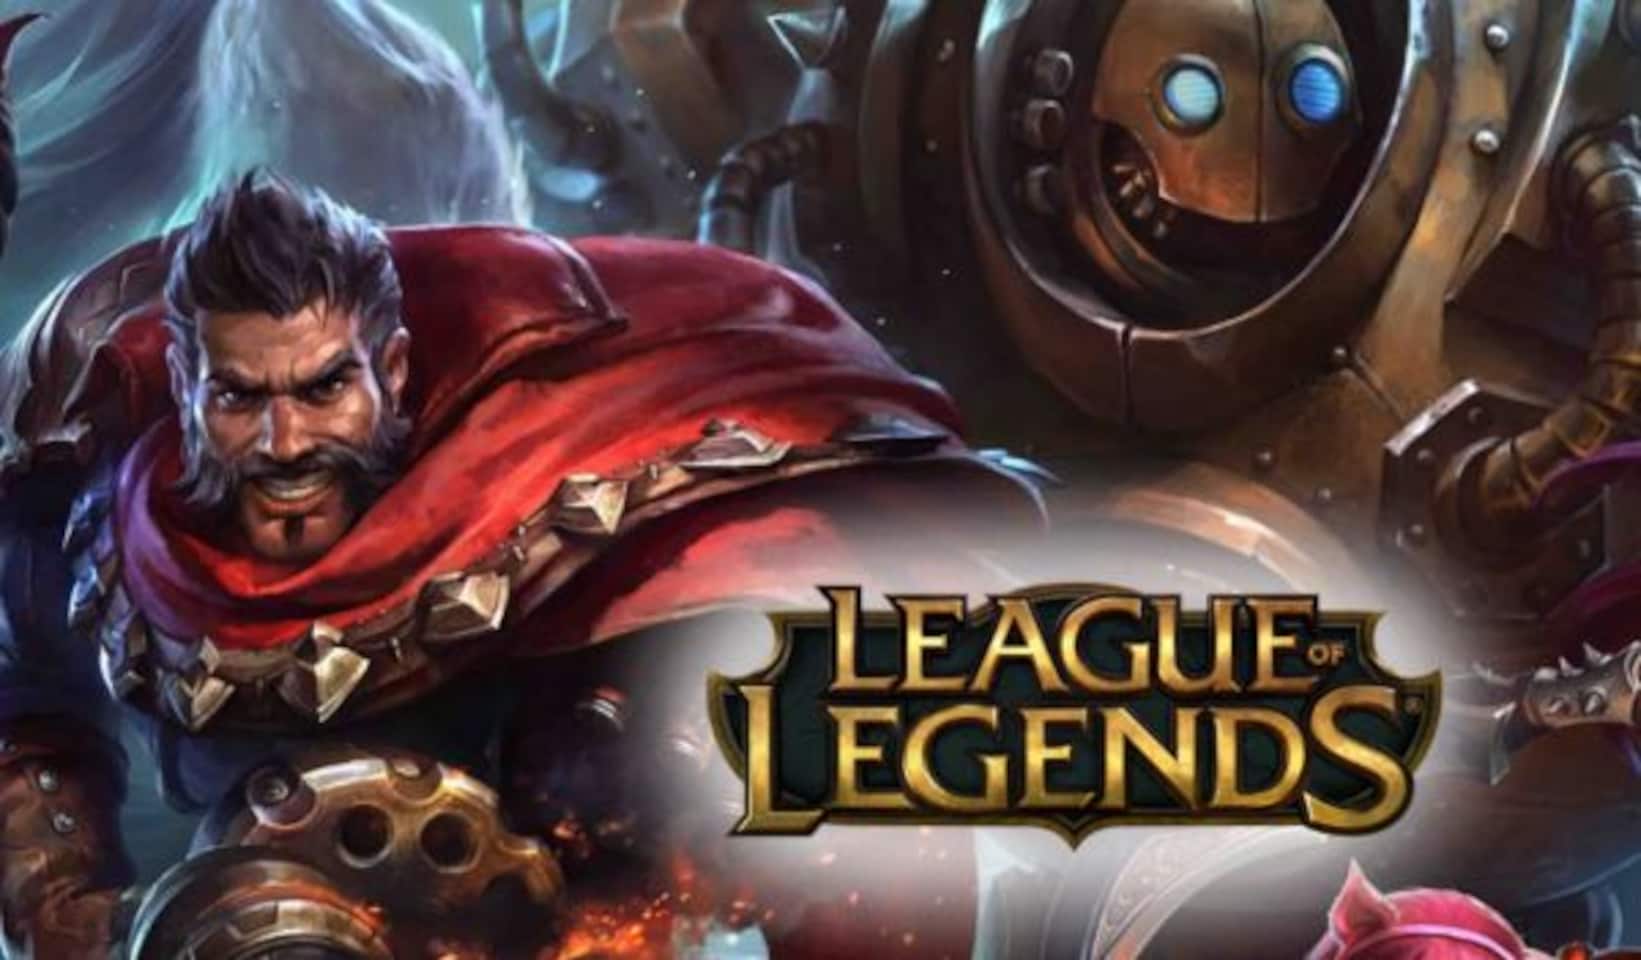 EUR Buy Card Gift Riot of - Key Legends League Cheap - 10 EUROPE -